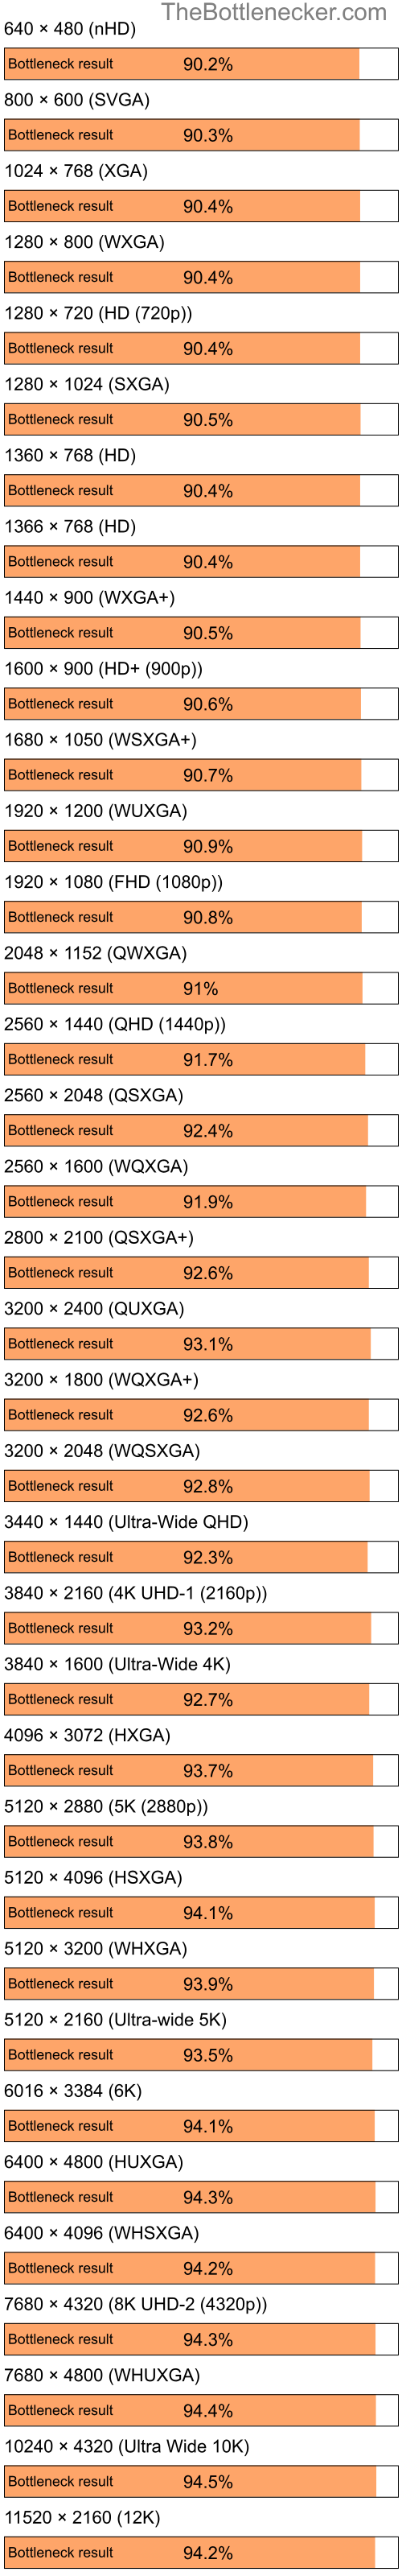 Bottleneck results by resolution for Intel Celeron and AMD Mobility Radeon 9200 in General Tasks